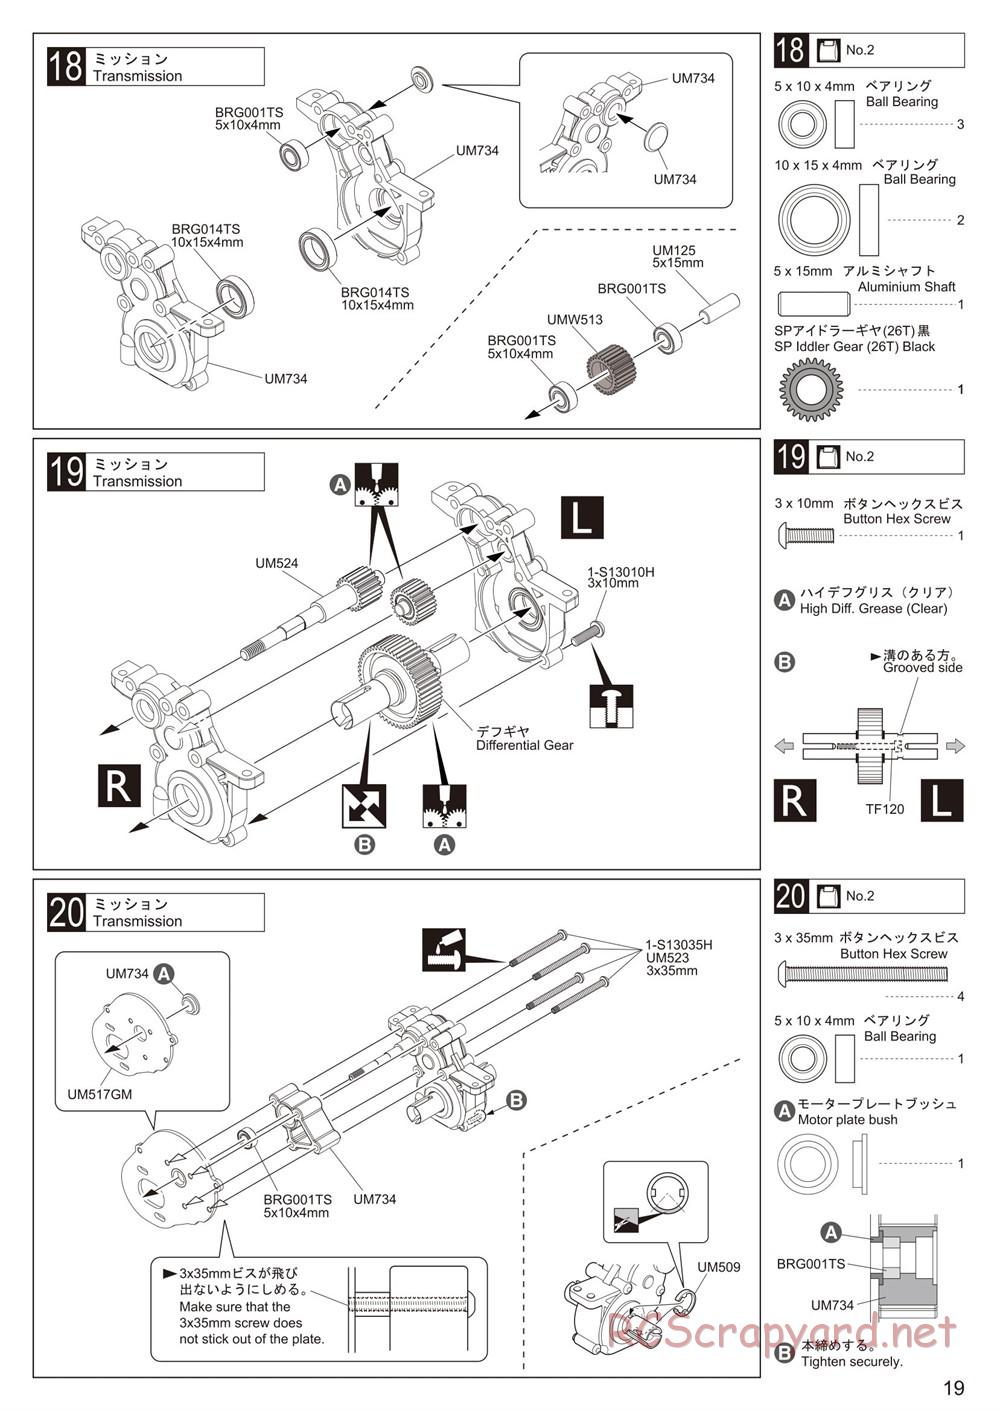 Kyosho - Ultima RB6.6 - Manual - Page 19